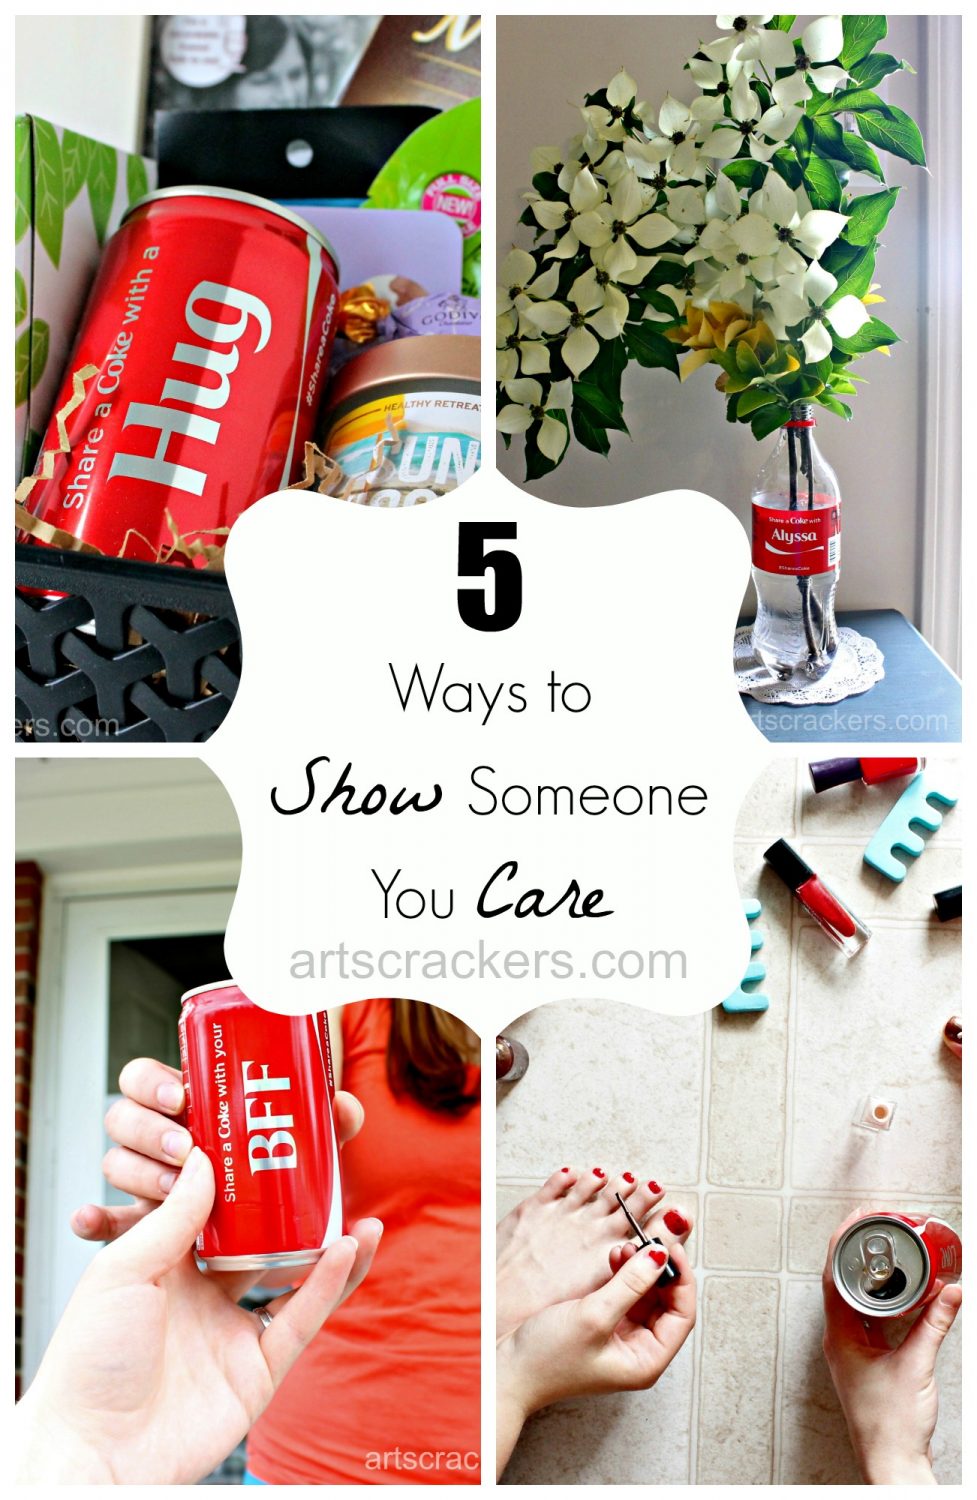 Coca-Cola 5 Ways to Show Someone You Care. Click the picture to read more.